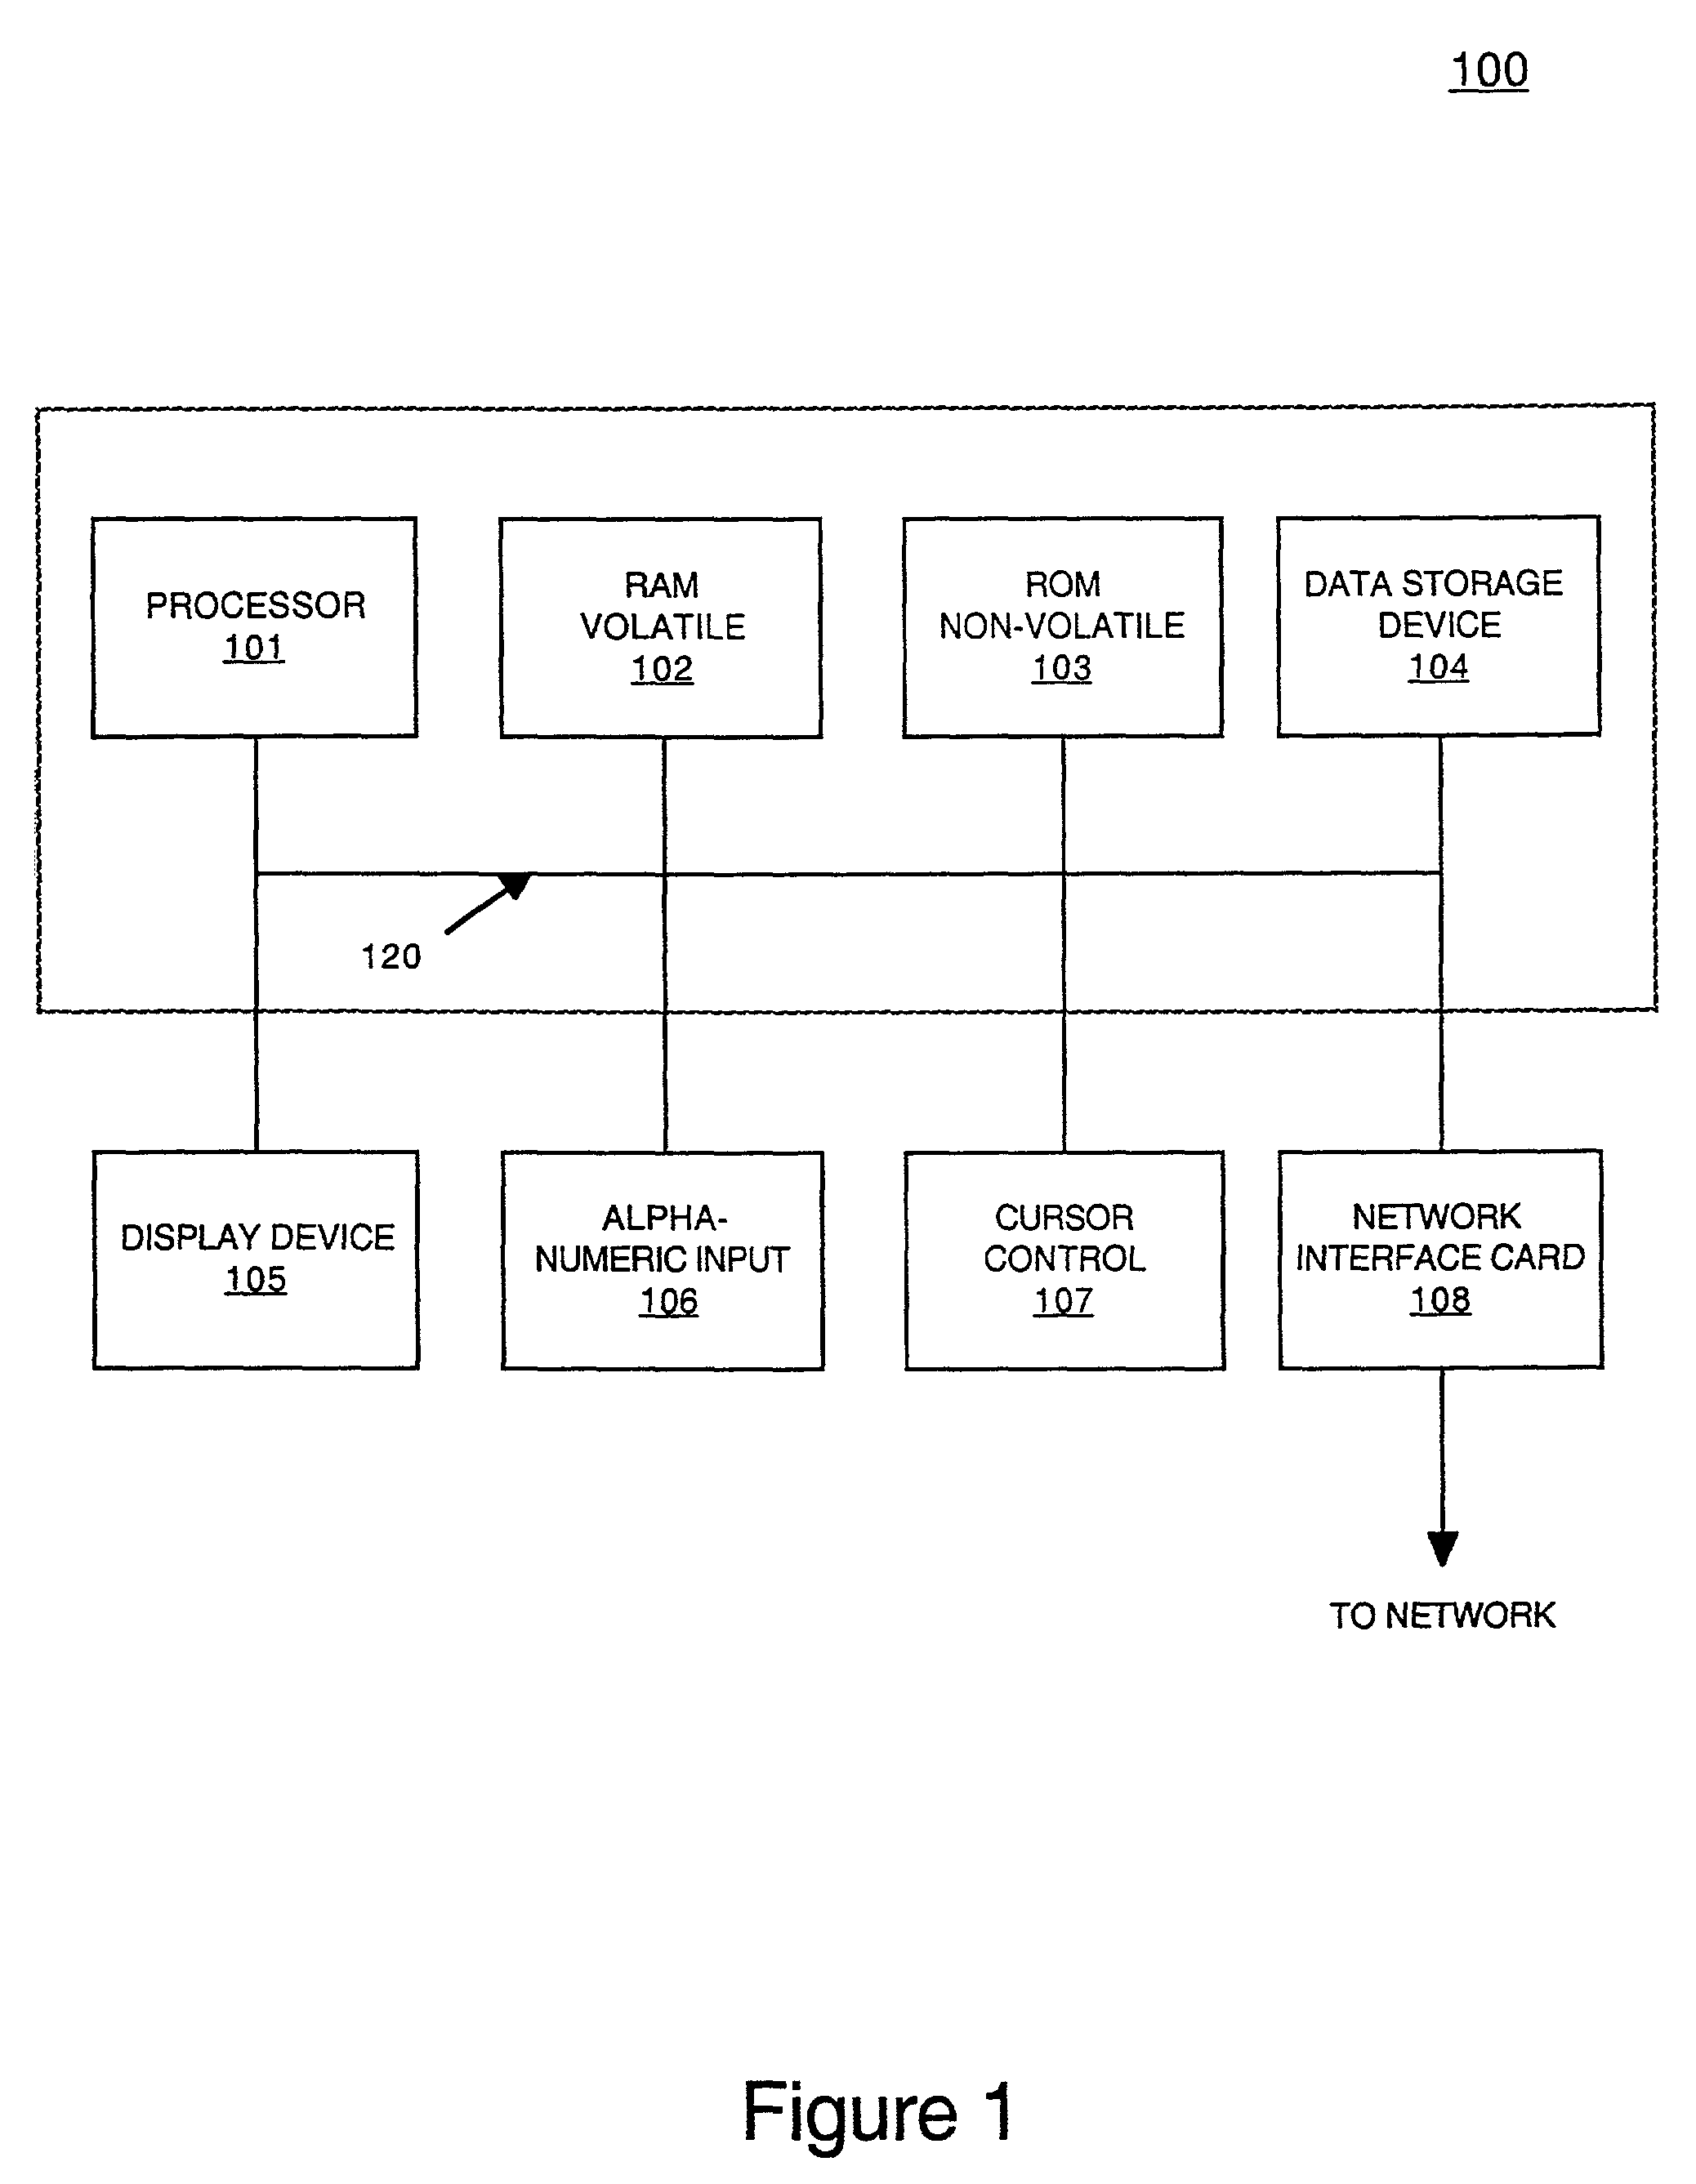 Method and apparatus for automatic transfer of a pre-recorded video program to a video cassette recorder